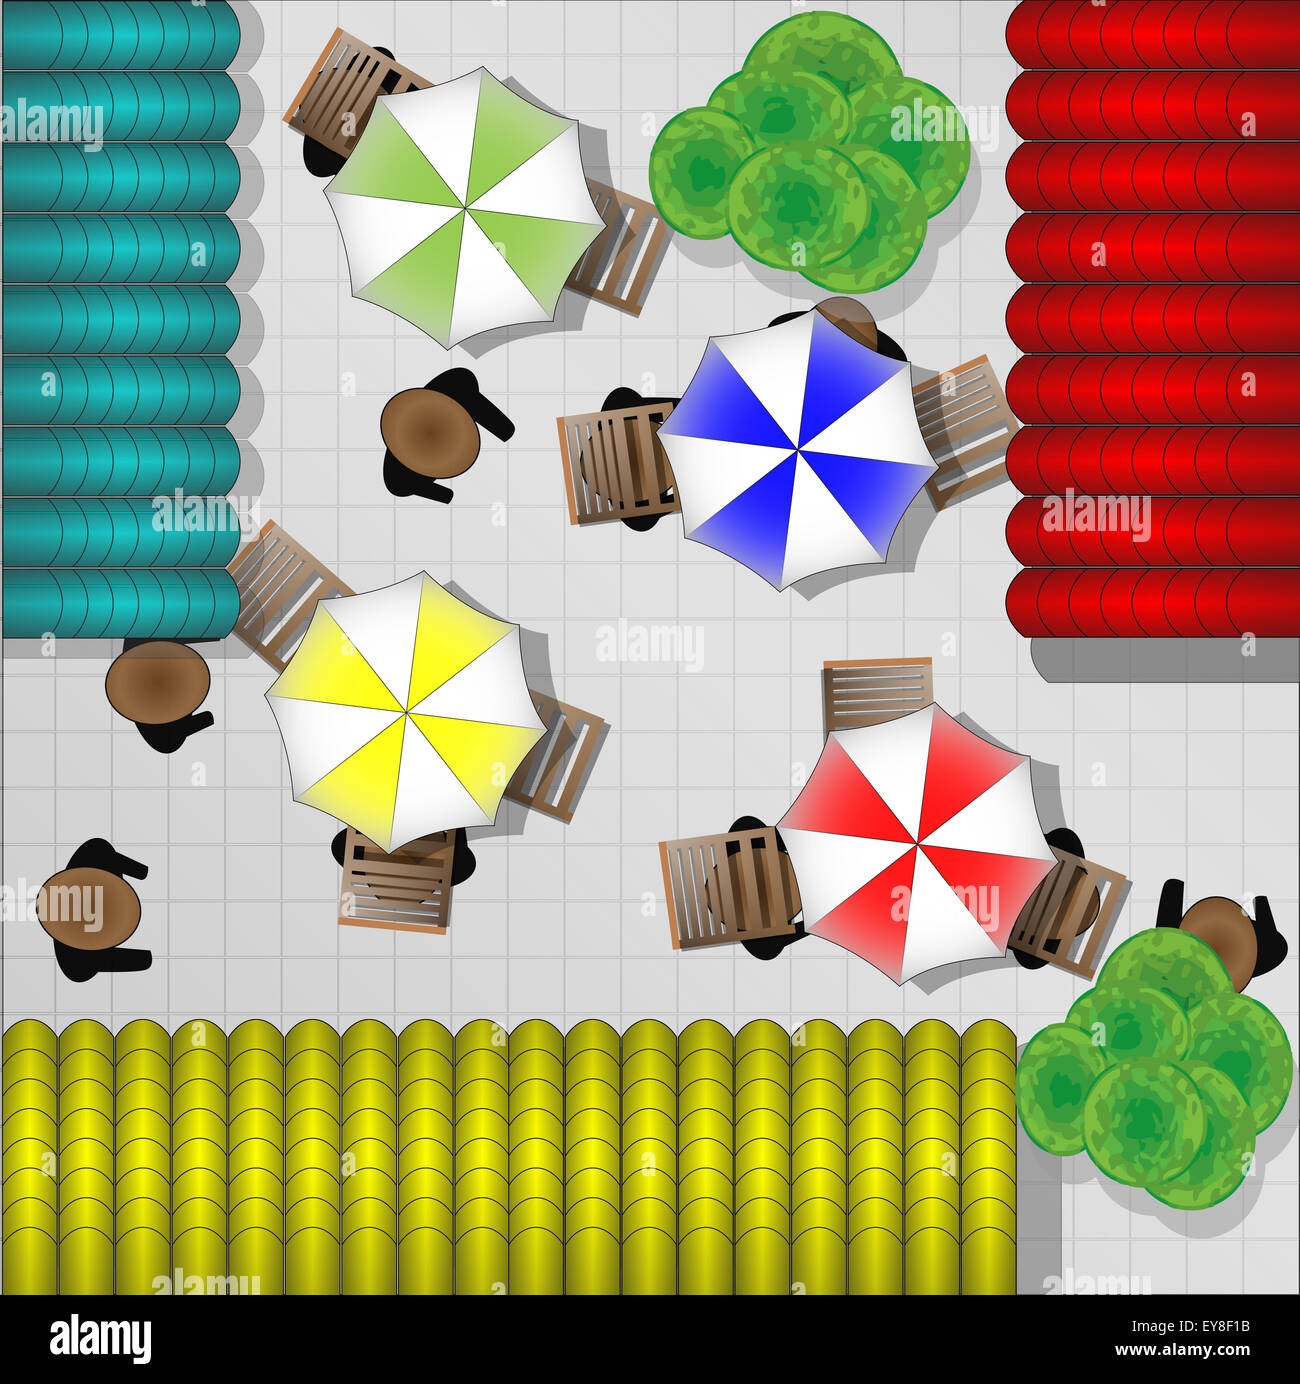 Illustration of restaurants with chairs and parasols from above Stock Photo